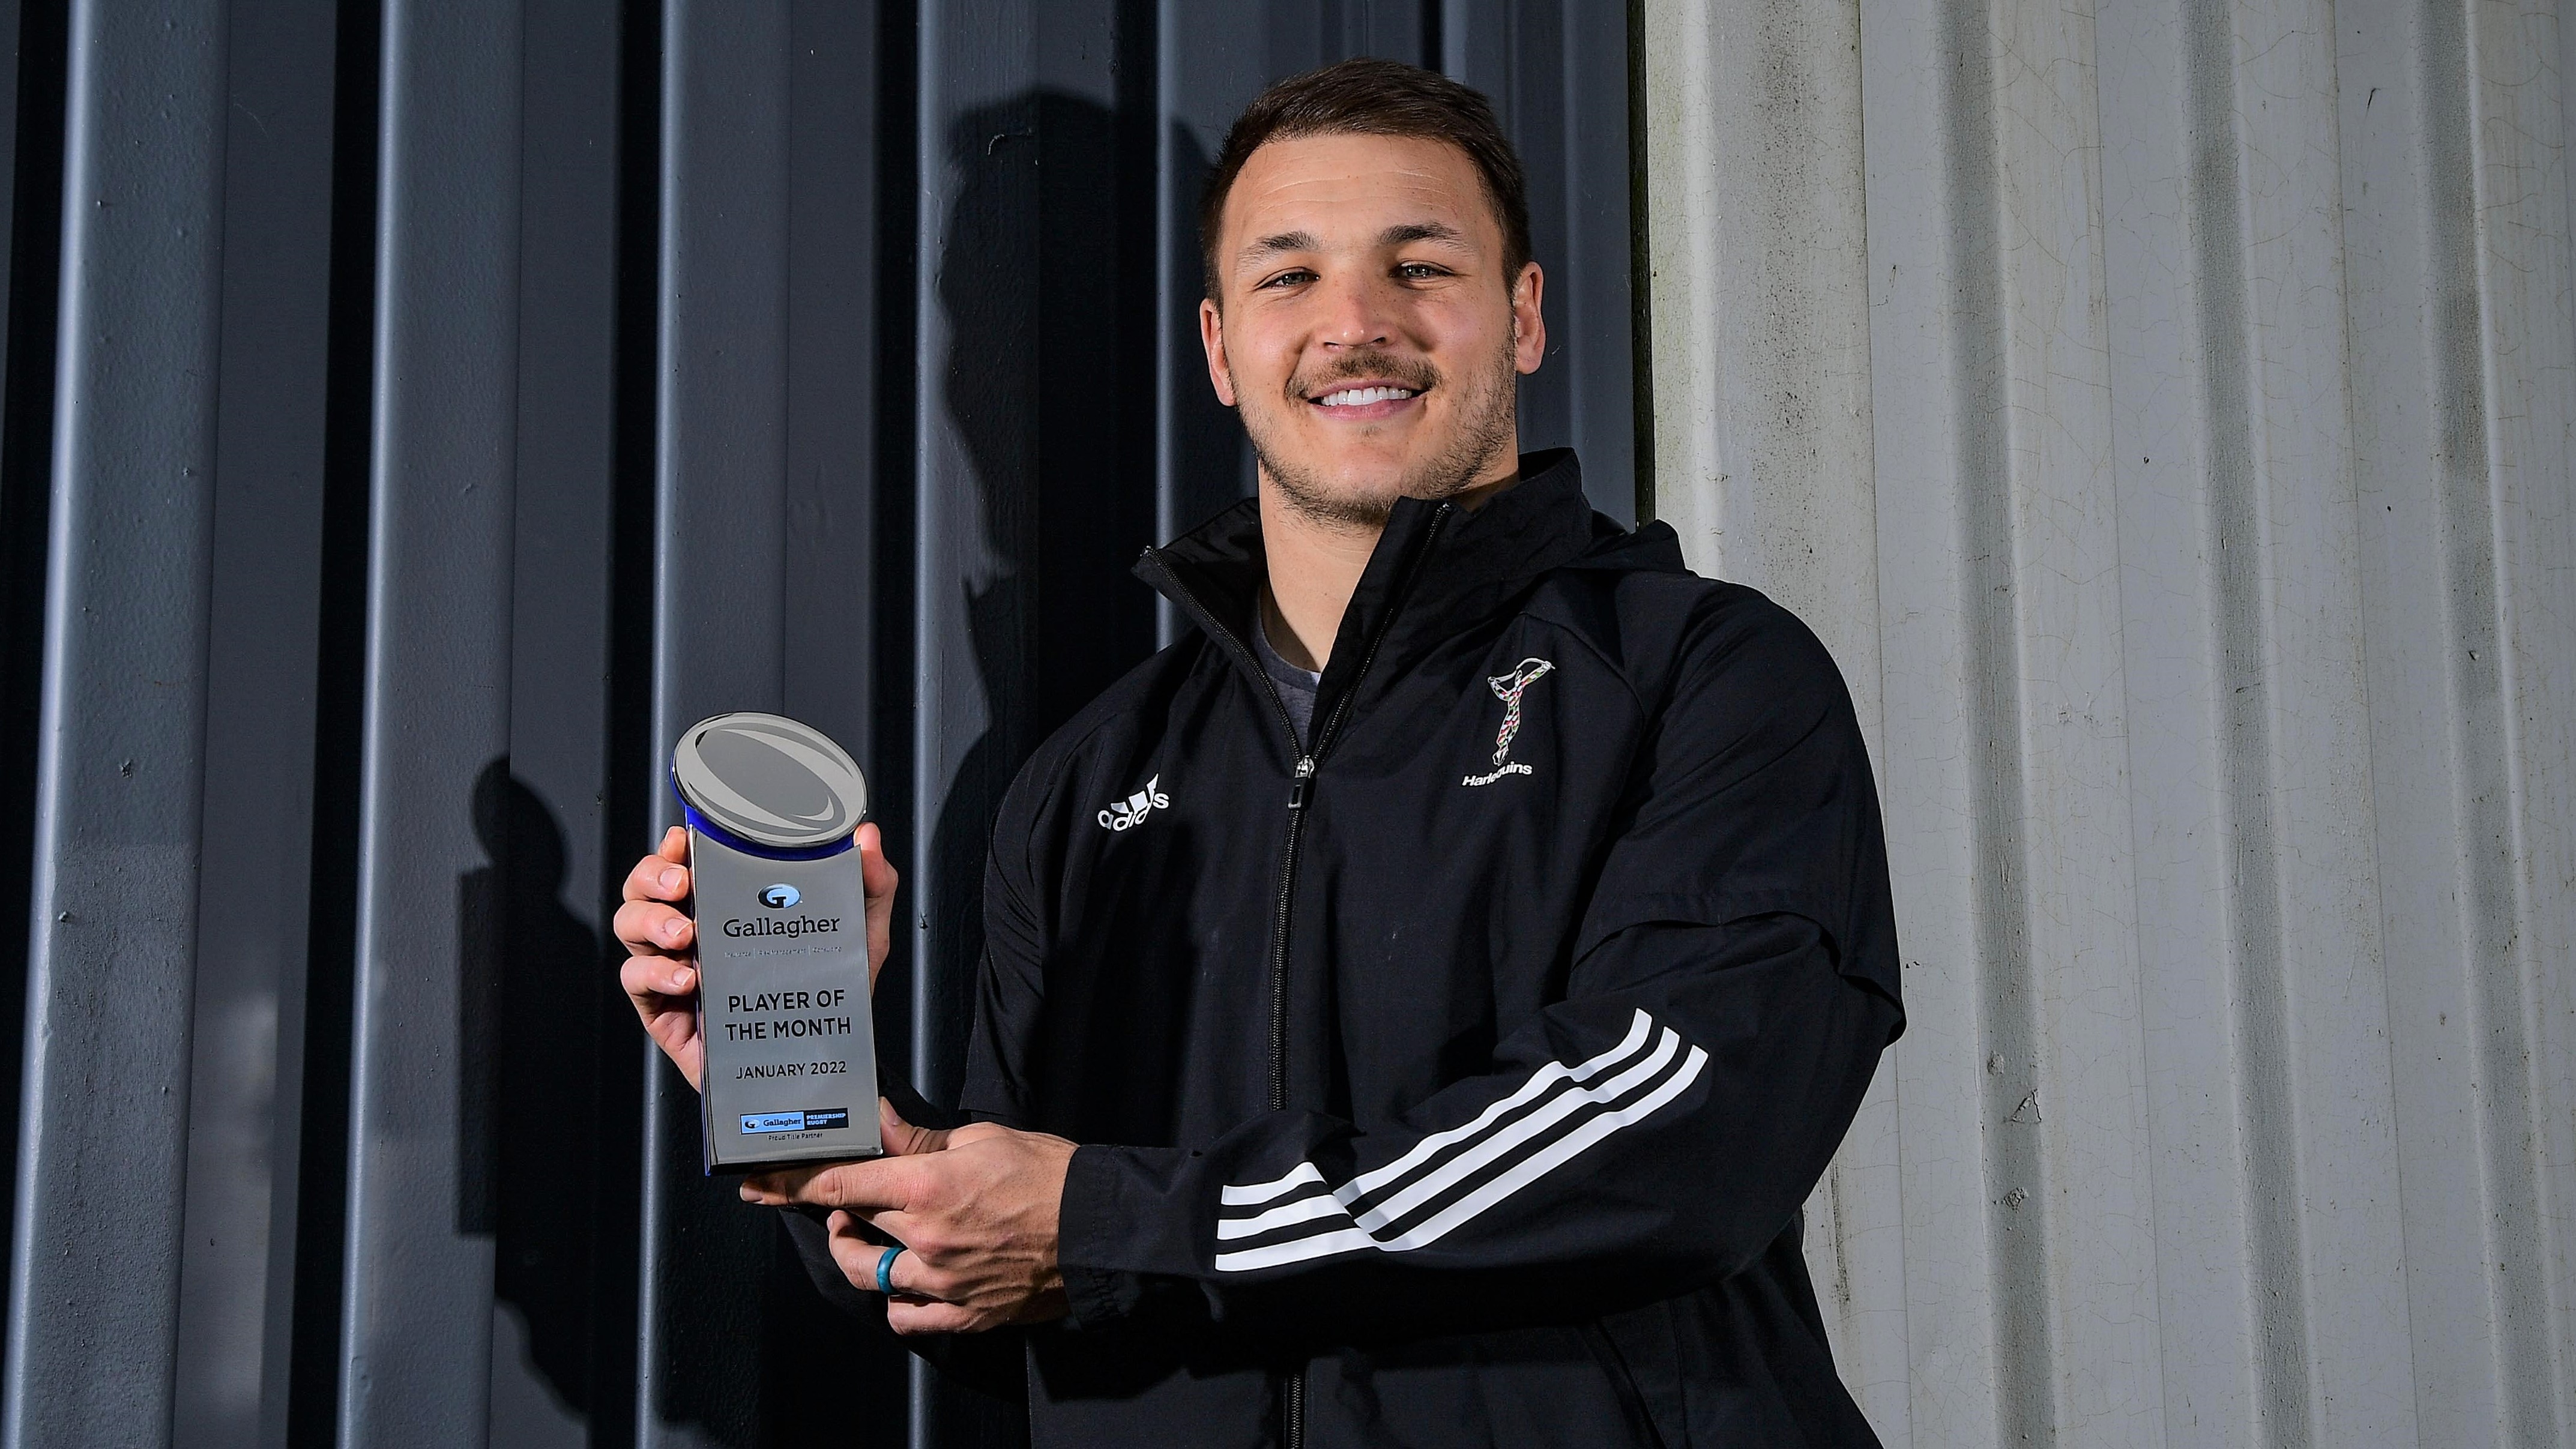 Gallagher Premiership Rugby player of the month for January is Harlequins, Andre Esterhuizen who poses with his Gallagher Player of the Month Trophy. Photo: Tom Sandberg/PPAUK/Gallagher